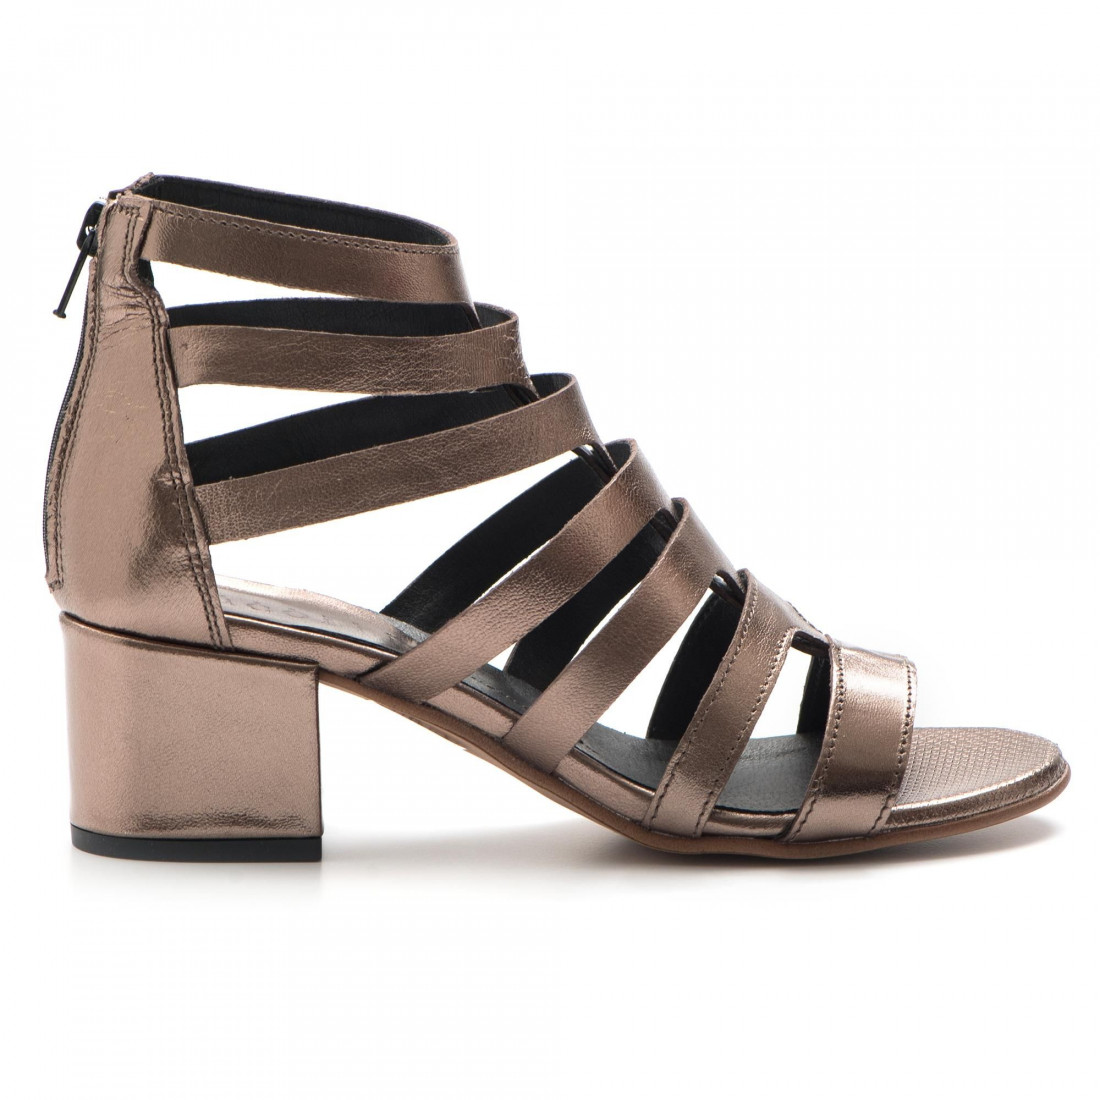 Taupe sandals with straps